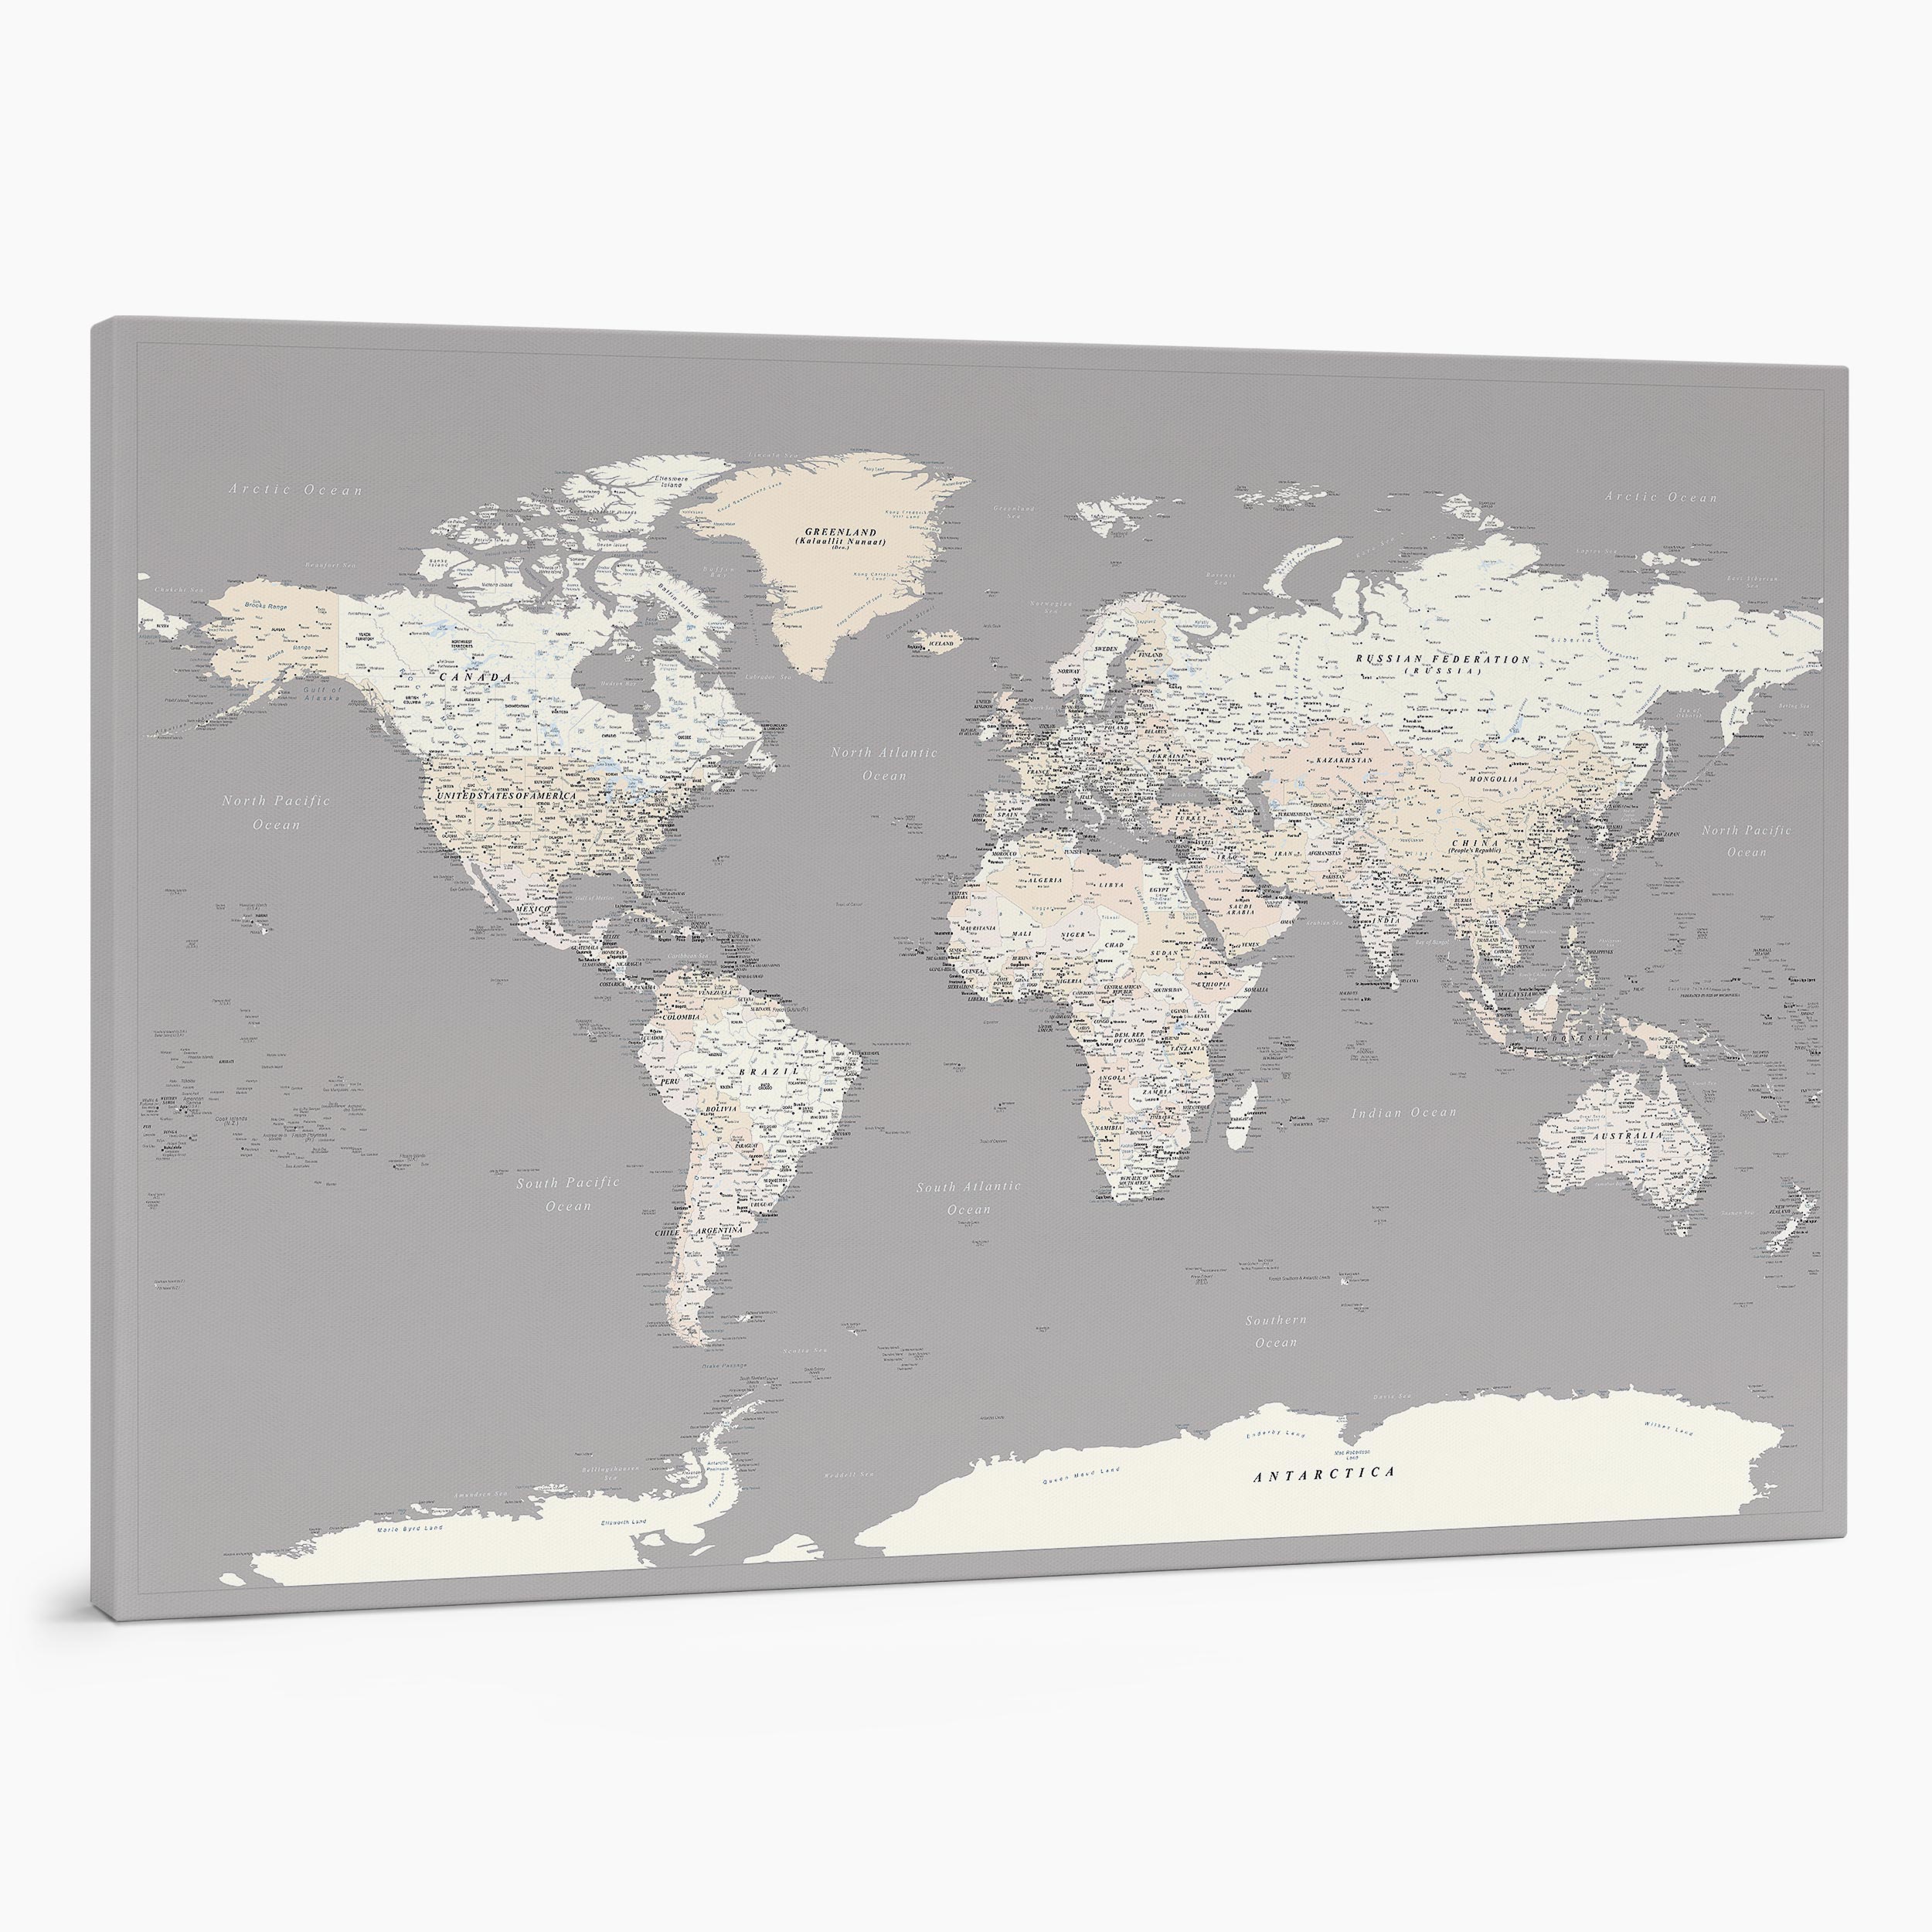 1P large push pin world map to track places visited on canvas grey cream